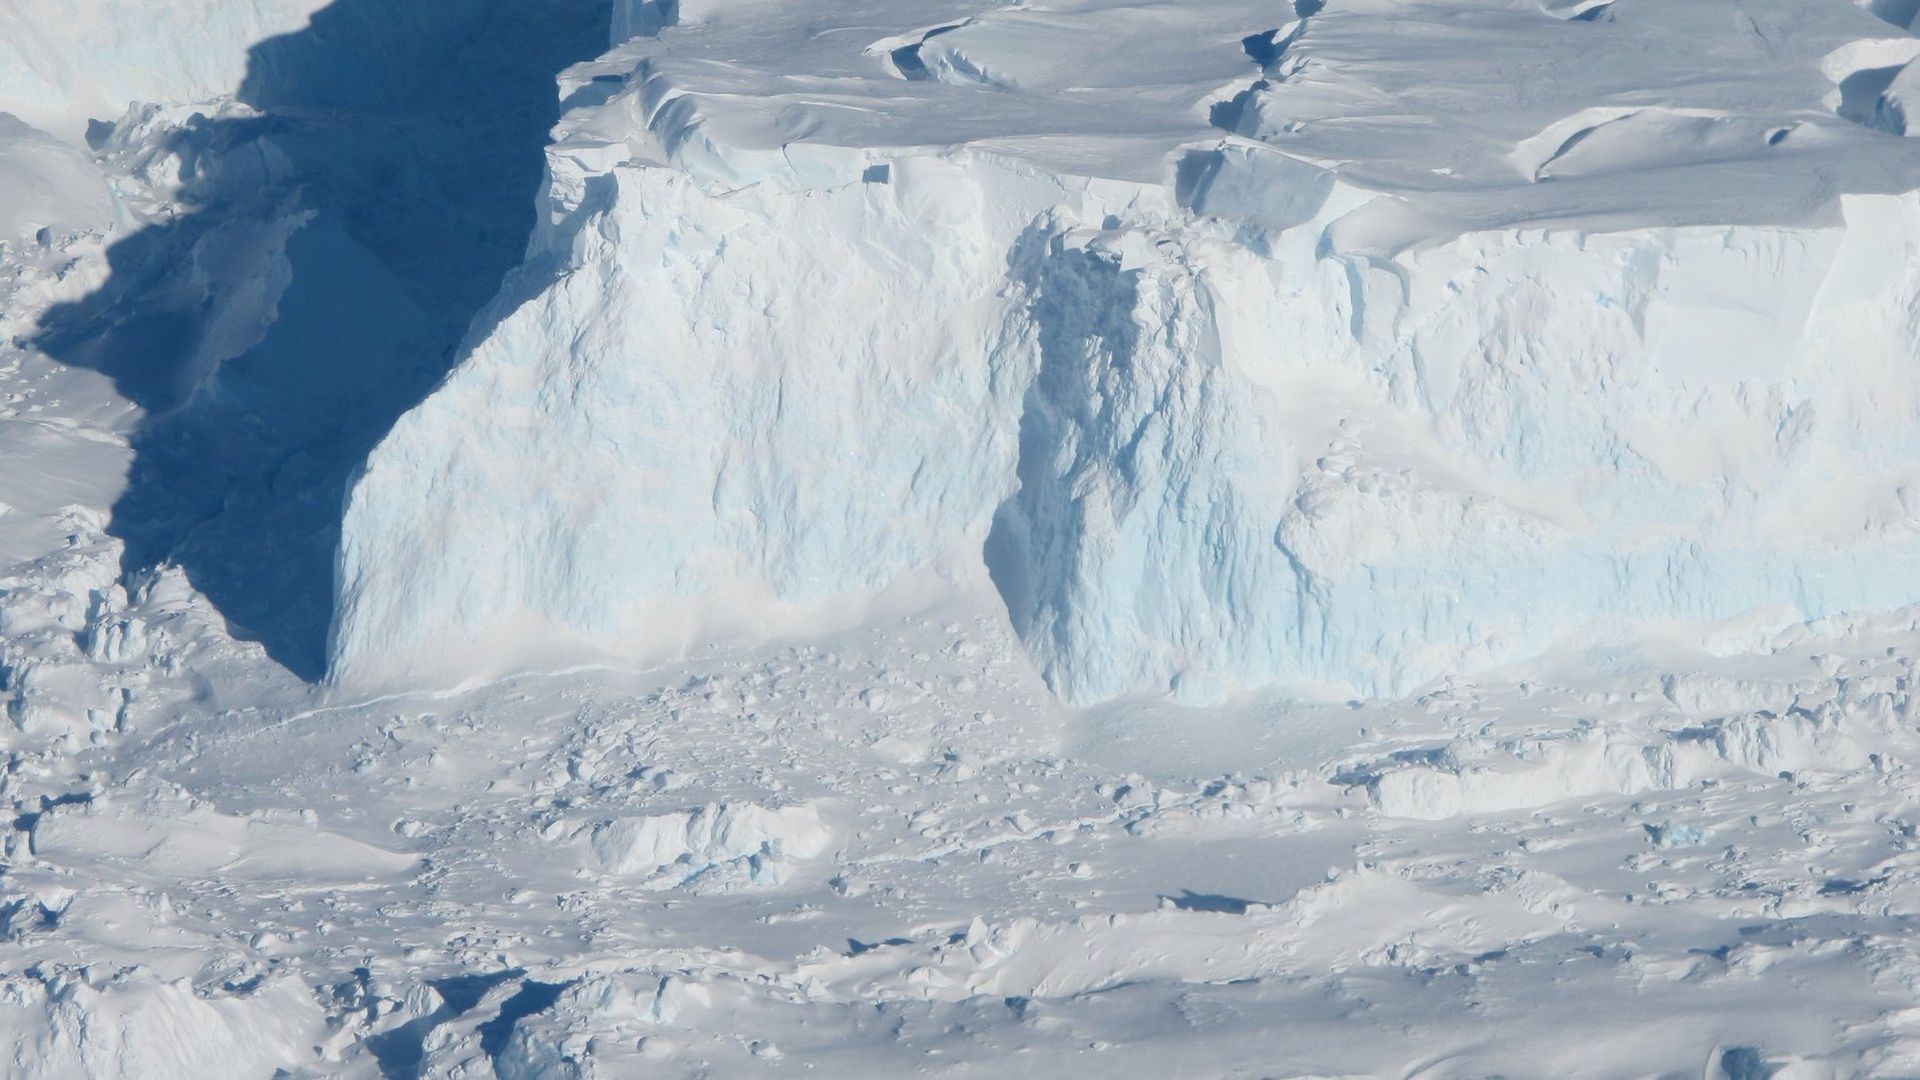 Aerial picture of ice cliffs at the edge of Thwaites Ice Shelf in West Antarctica.